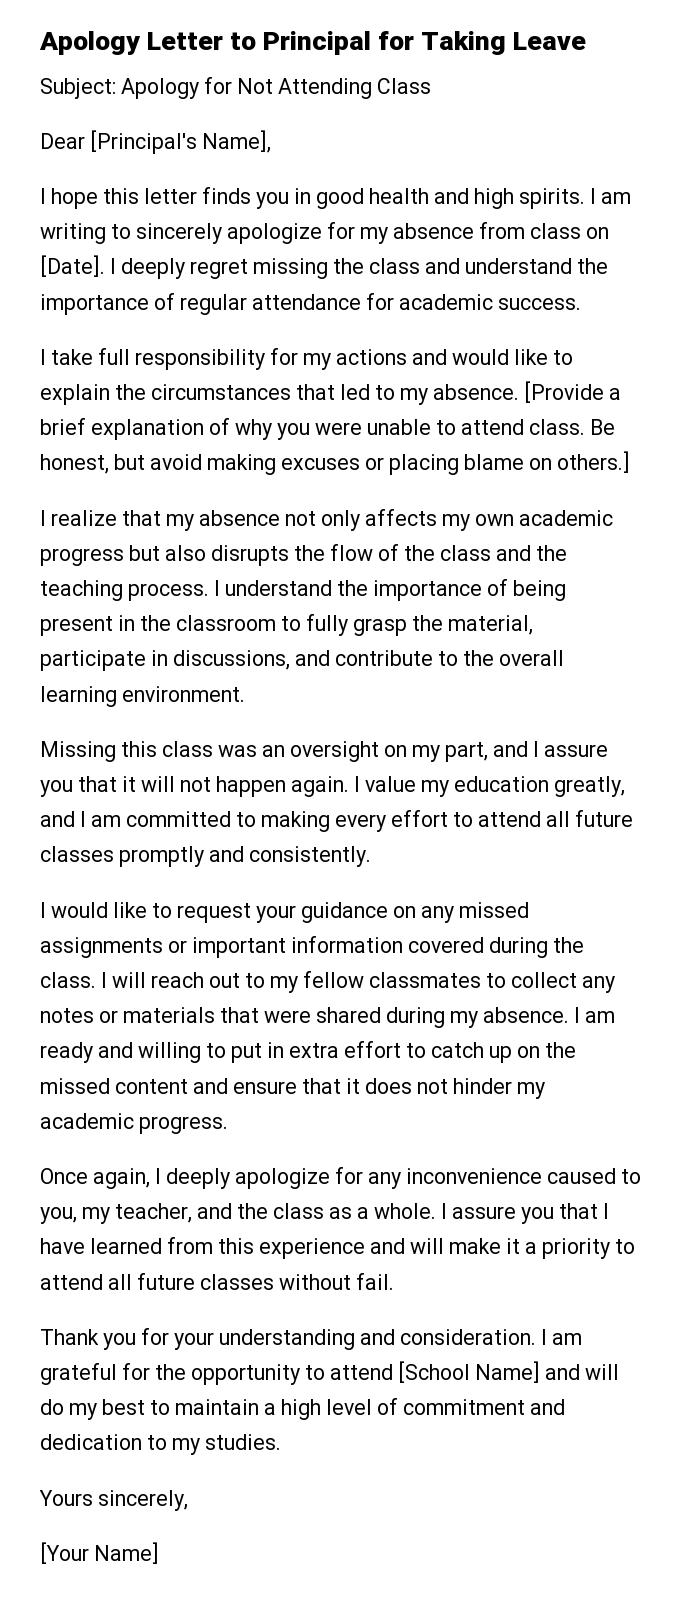 Apology Letter to Principal for Taking Leave